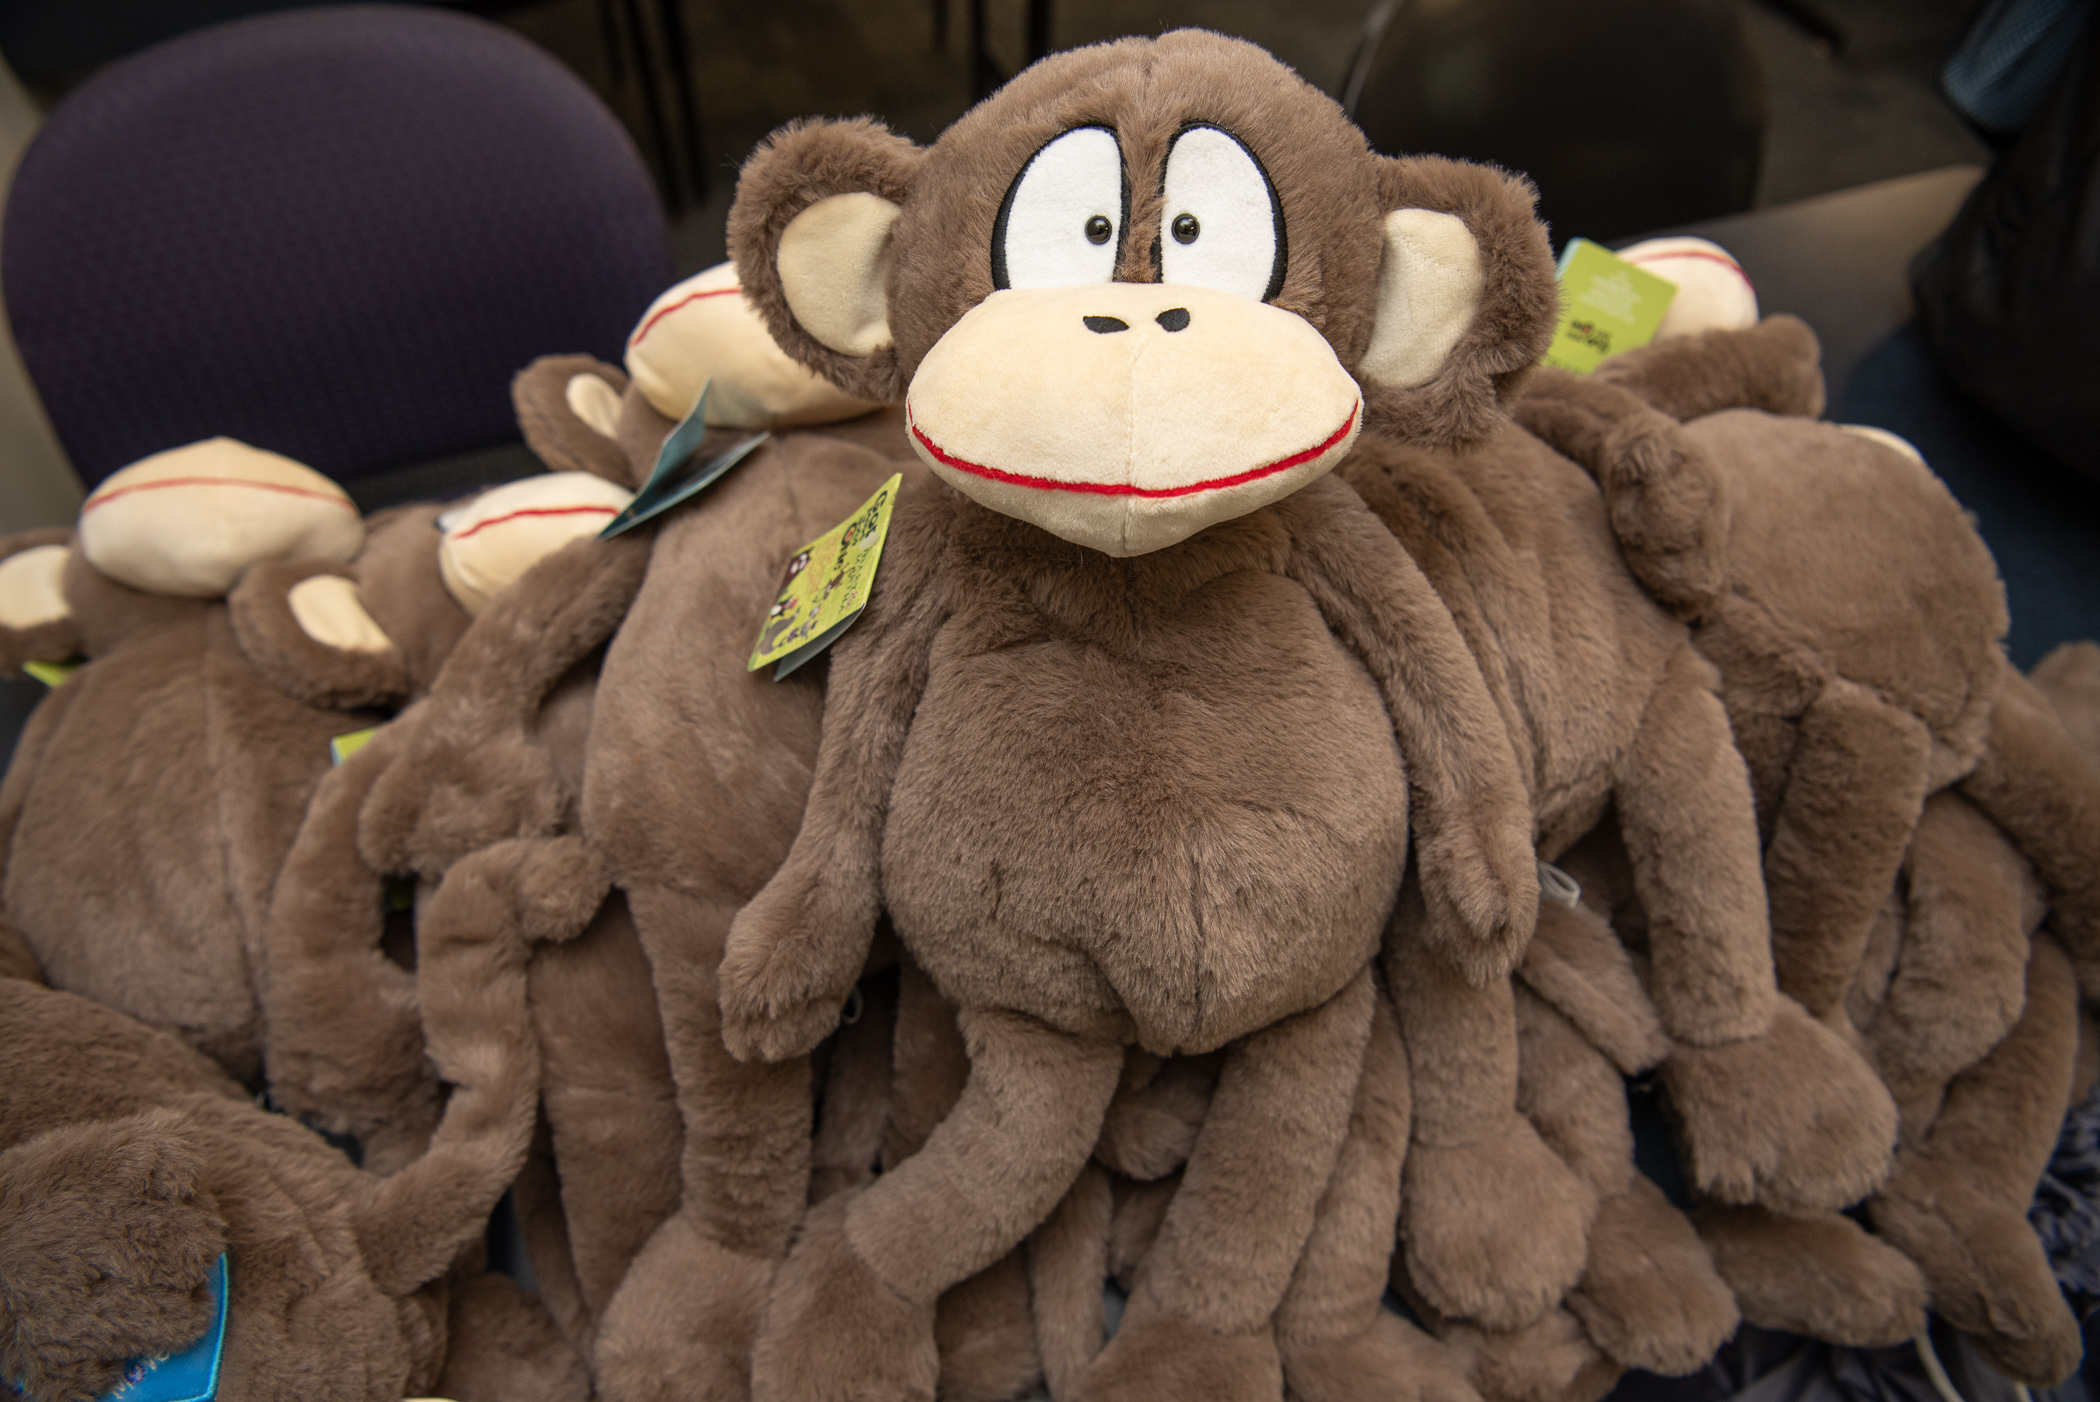 PTK pitches in on monkey movement for kids' comfort